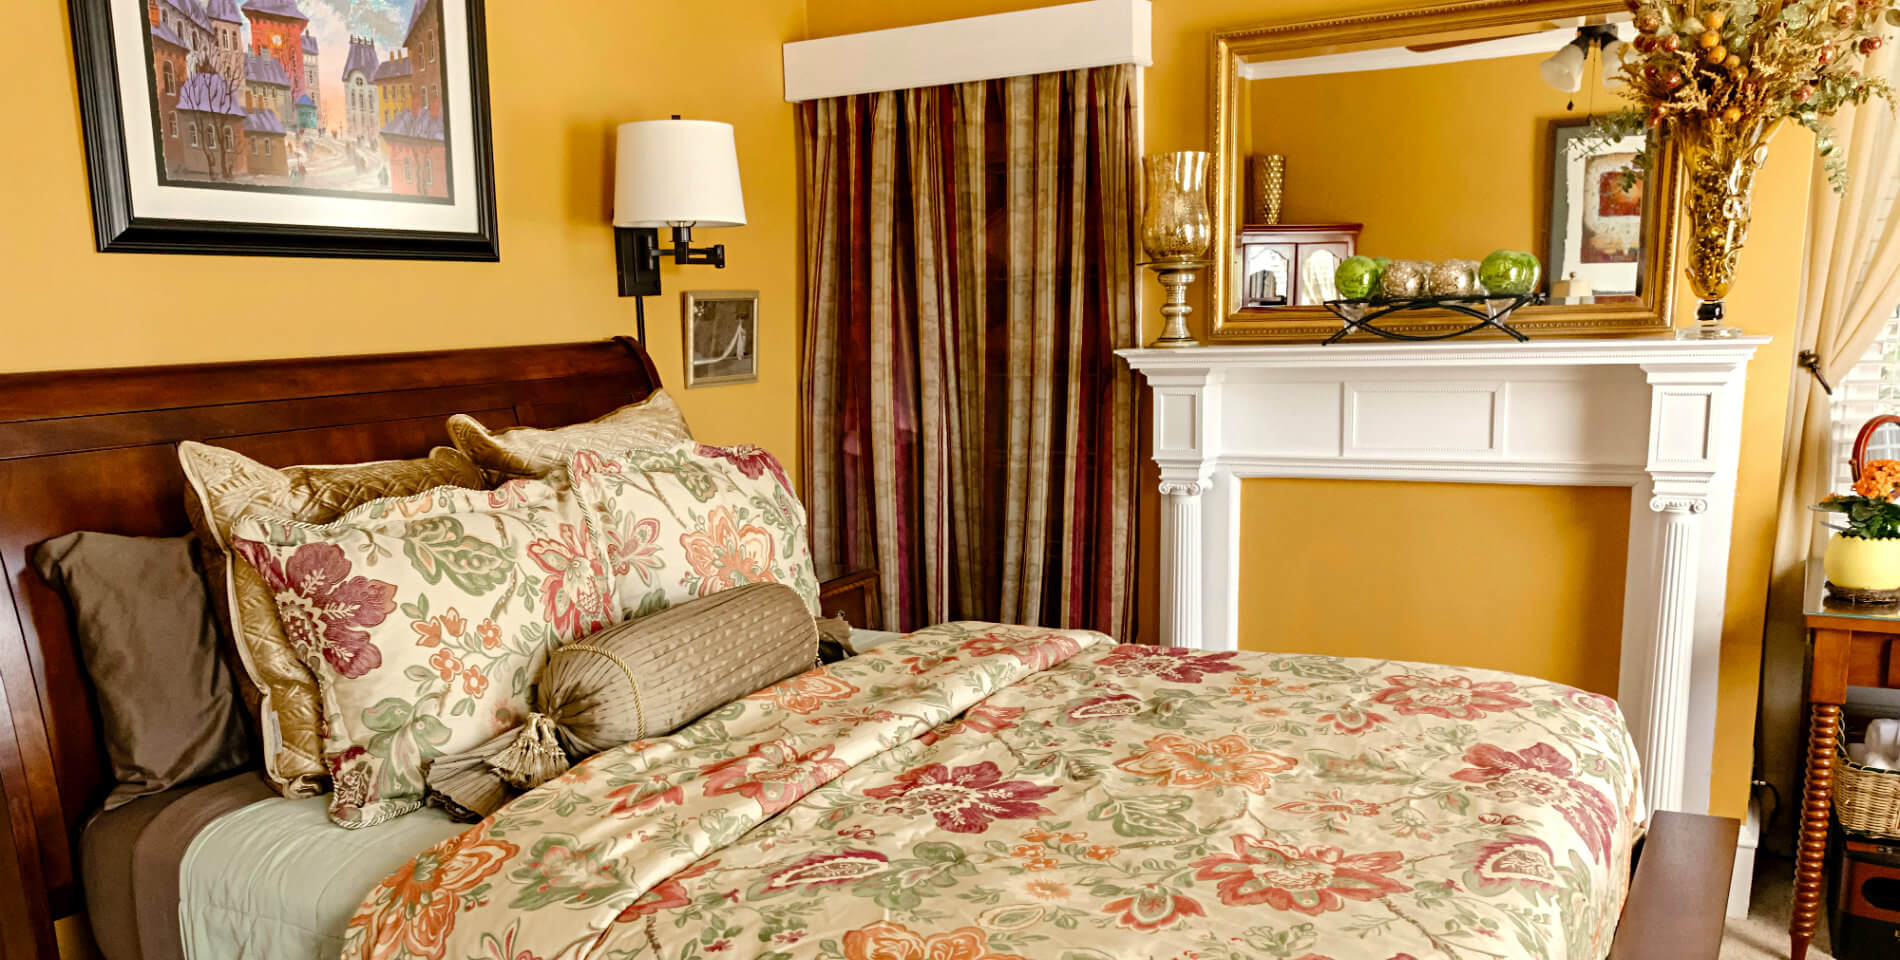 A bed with beige and floral print comforter and pillows and golden yellow walls in the Virginia Wilson room. 